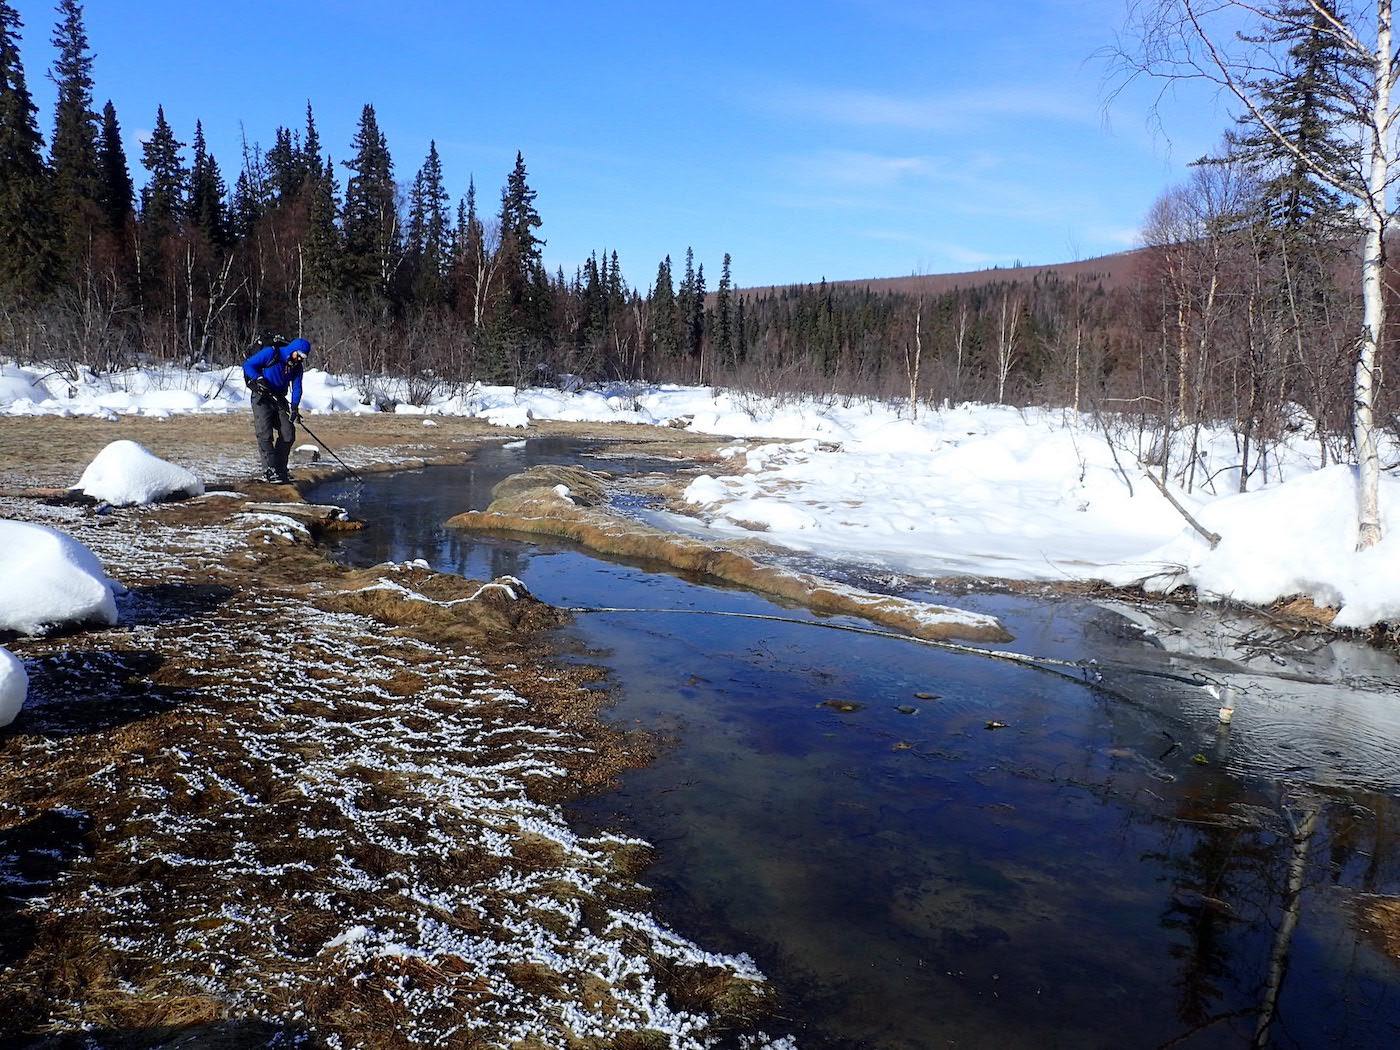 A man pokes a ski pole into a shallow pool of water surrounded by dead grass where heat from the water has melted back the surrounding snow. Spruce forest and a birch-covered hill are in the background.